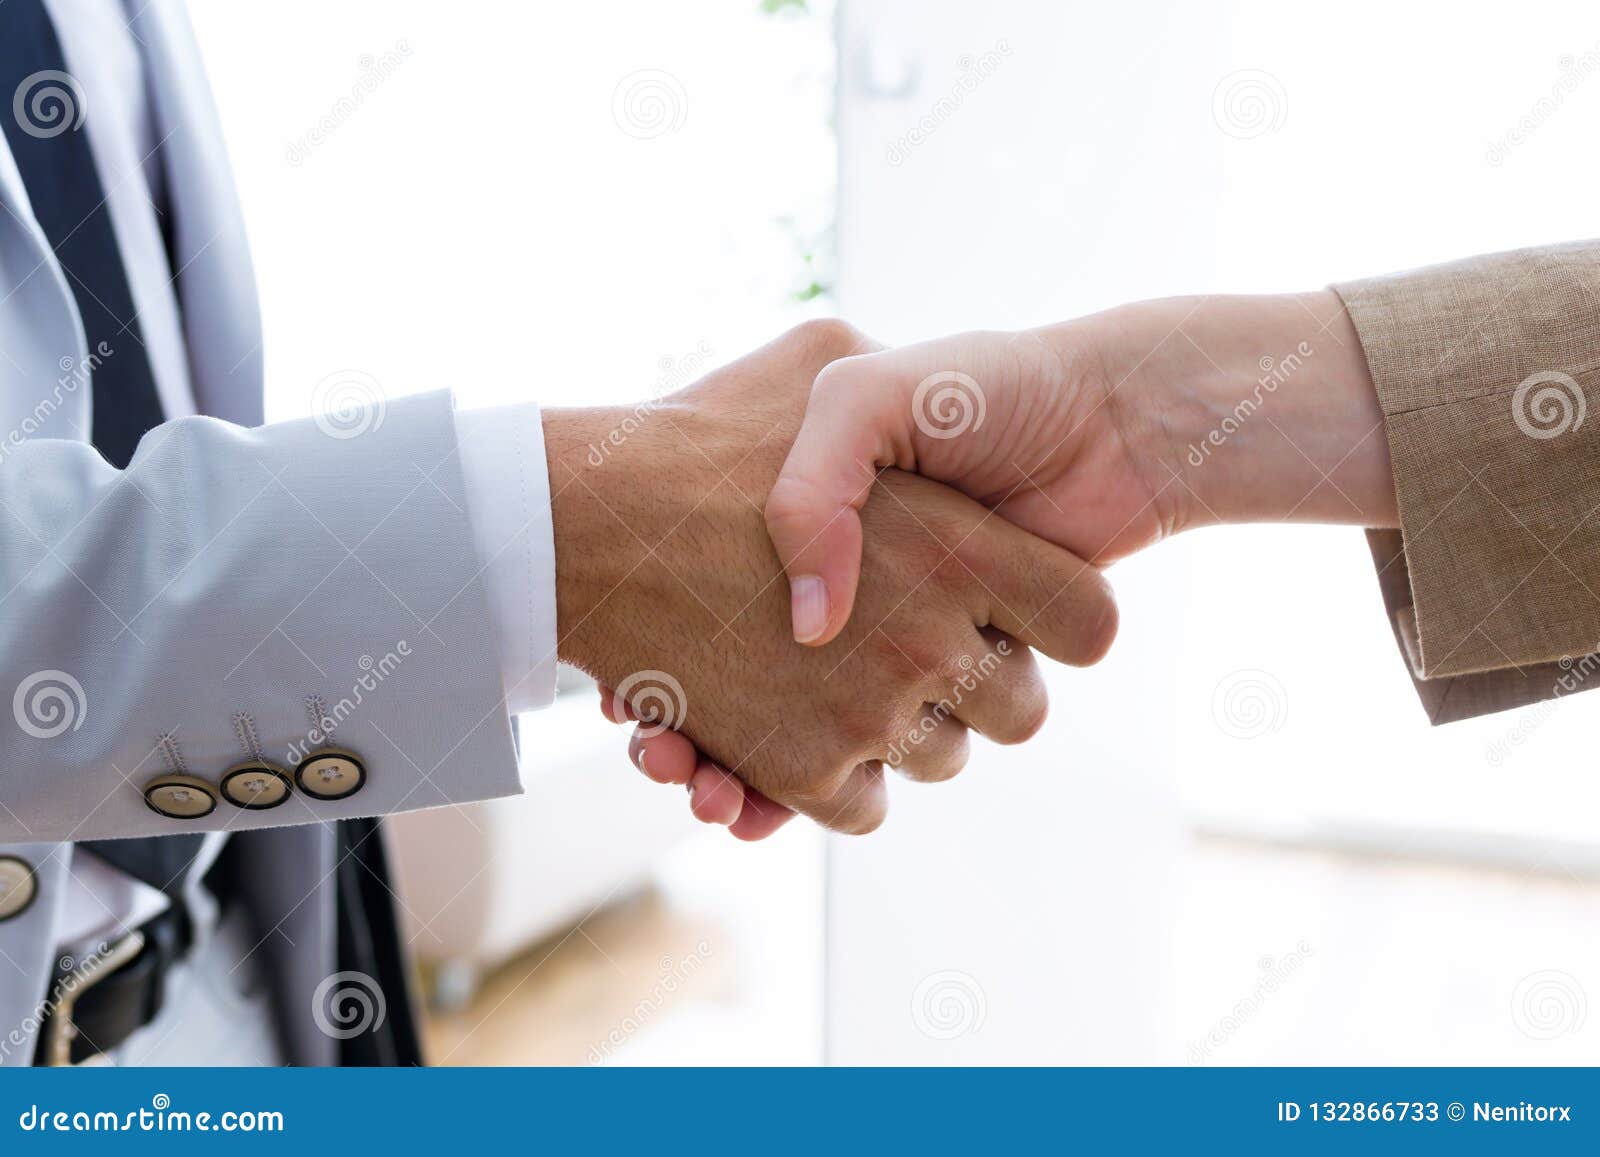 two bussines partners shaking their hands in the office.